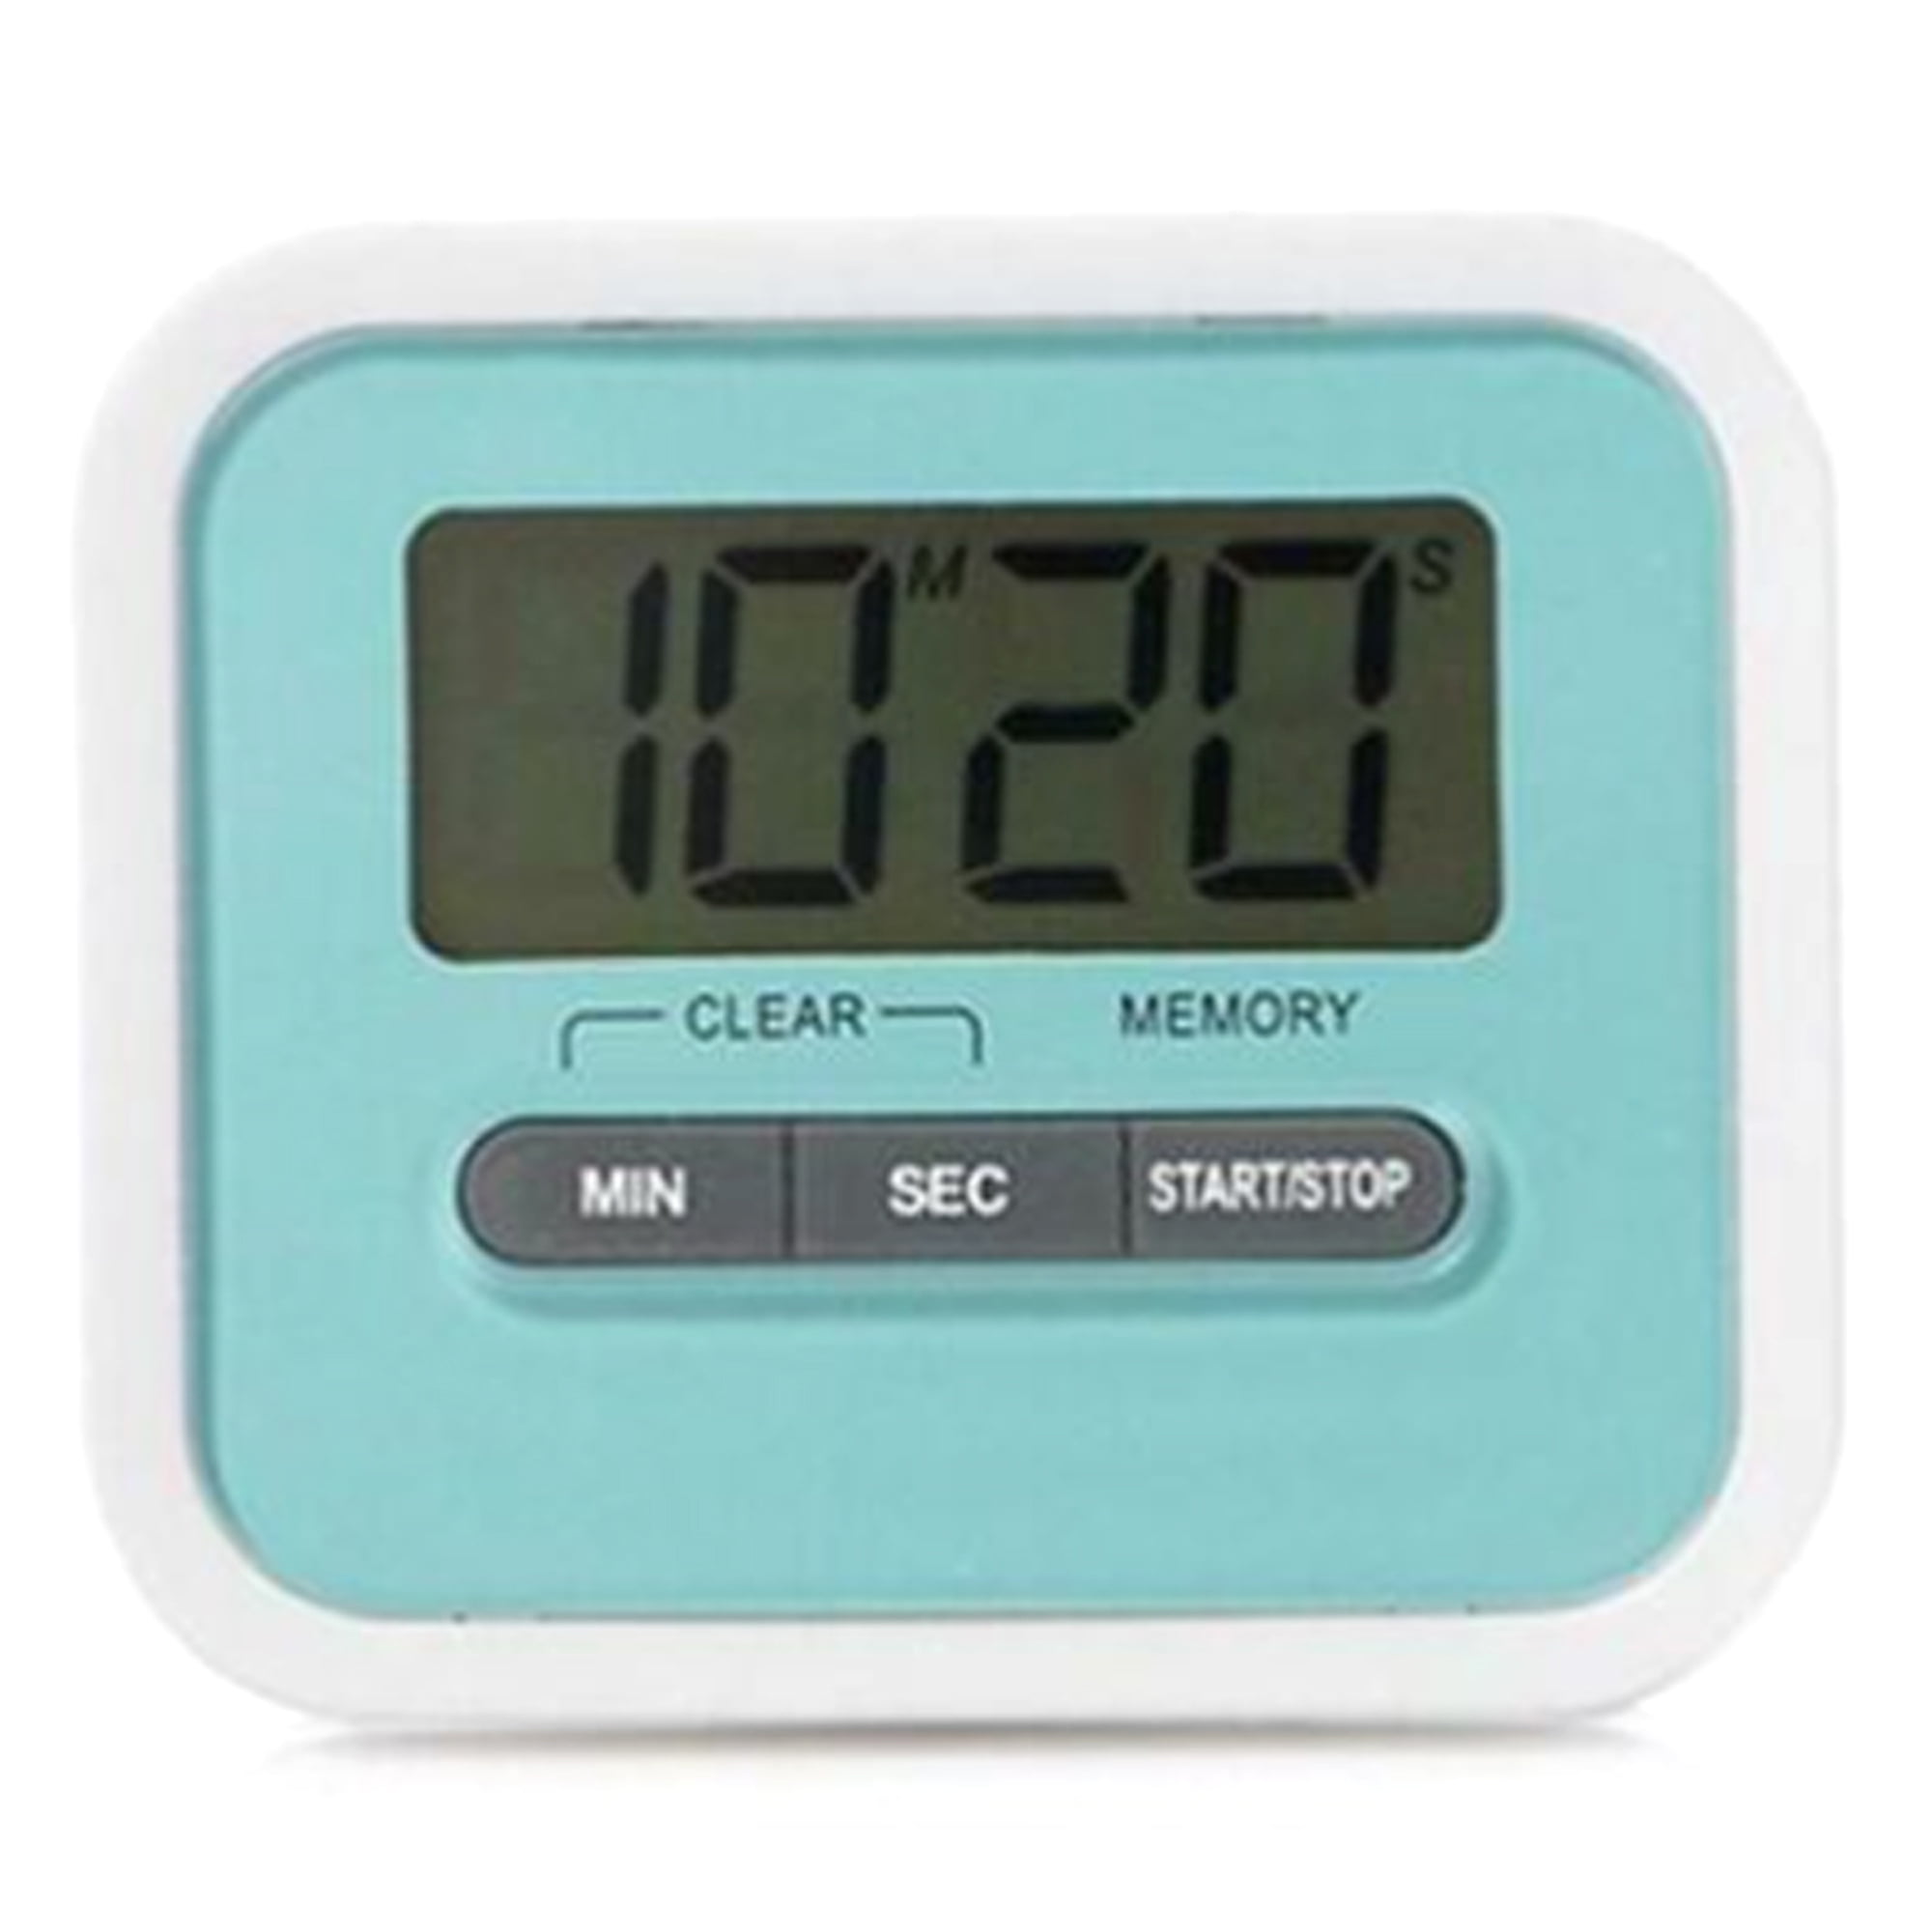 Details about   Digital Magnetic Kitchen Timer Electronic Countdown LCD Cooking Fridge Magnet 